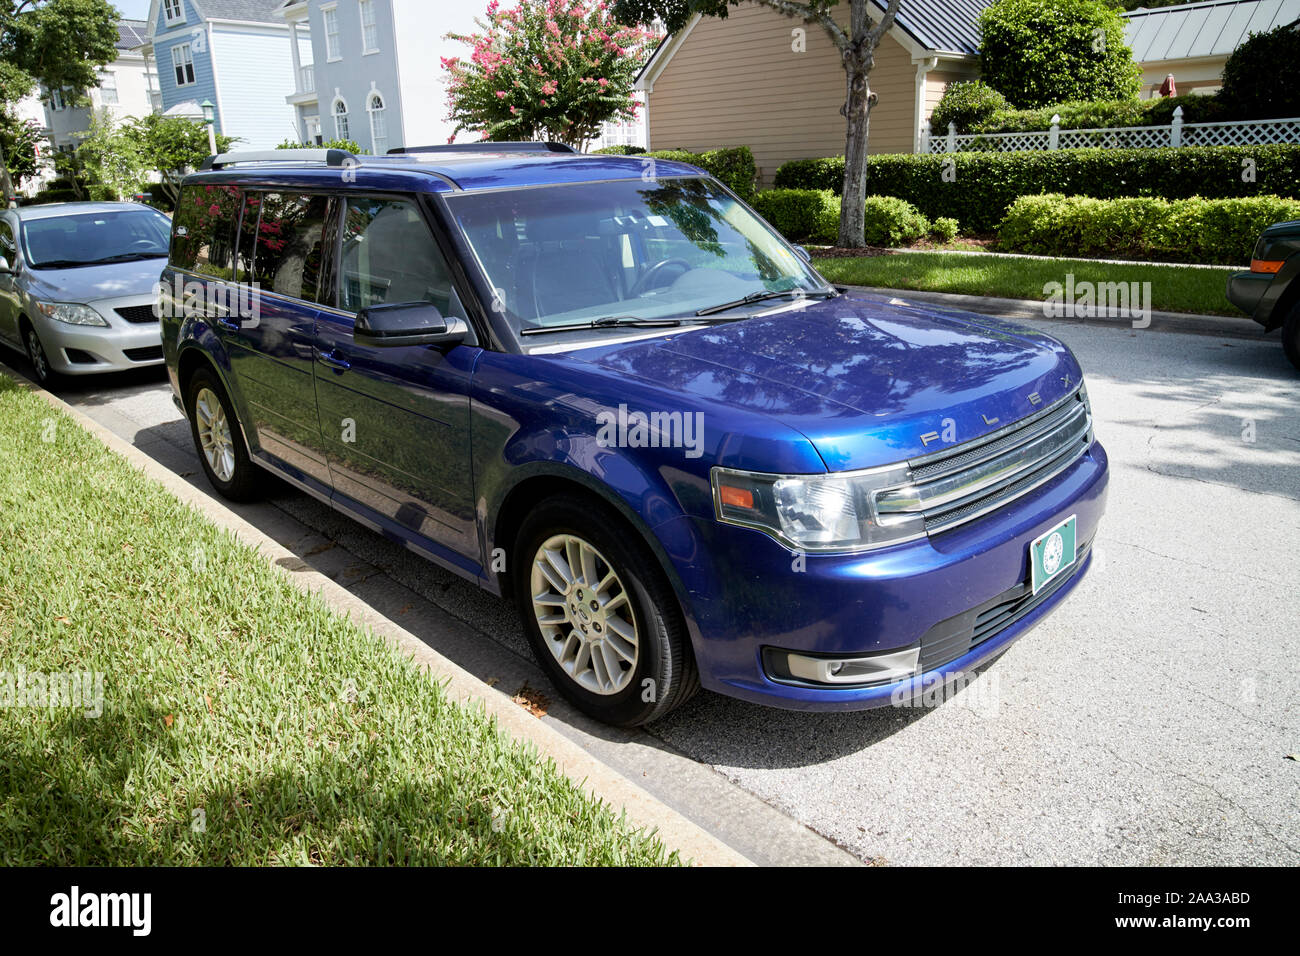 Ford Flex full size suv crossover véhicule florida usa Banque D'Images